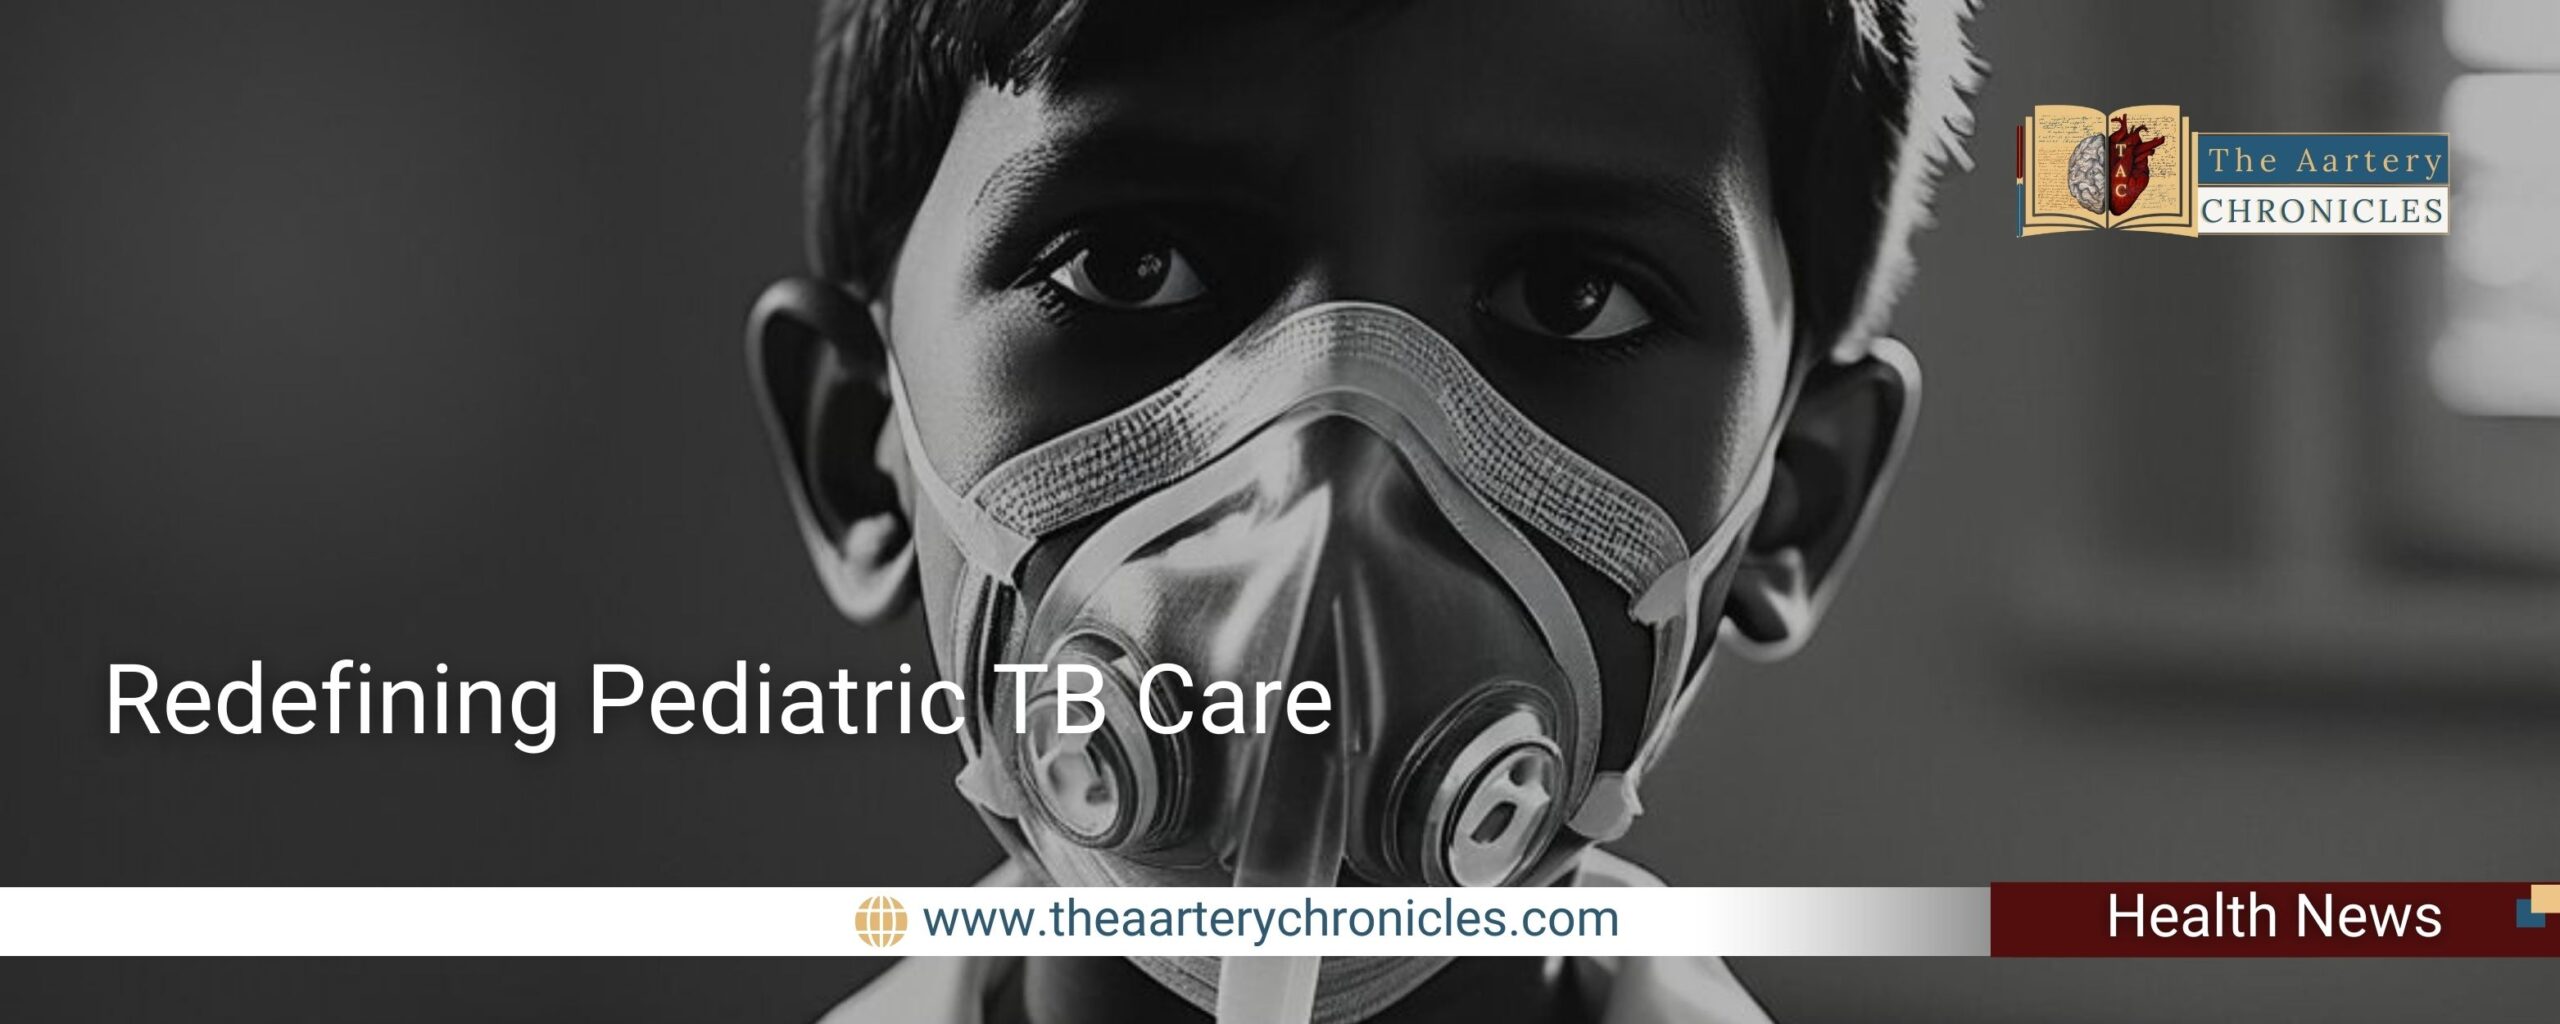 Redefining-Pediatric TB-care-the-aaartery-chronicles-tac